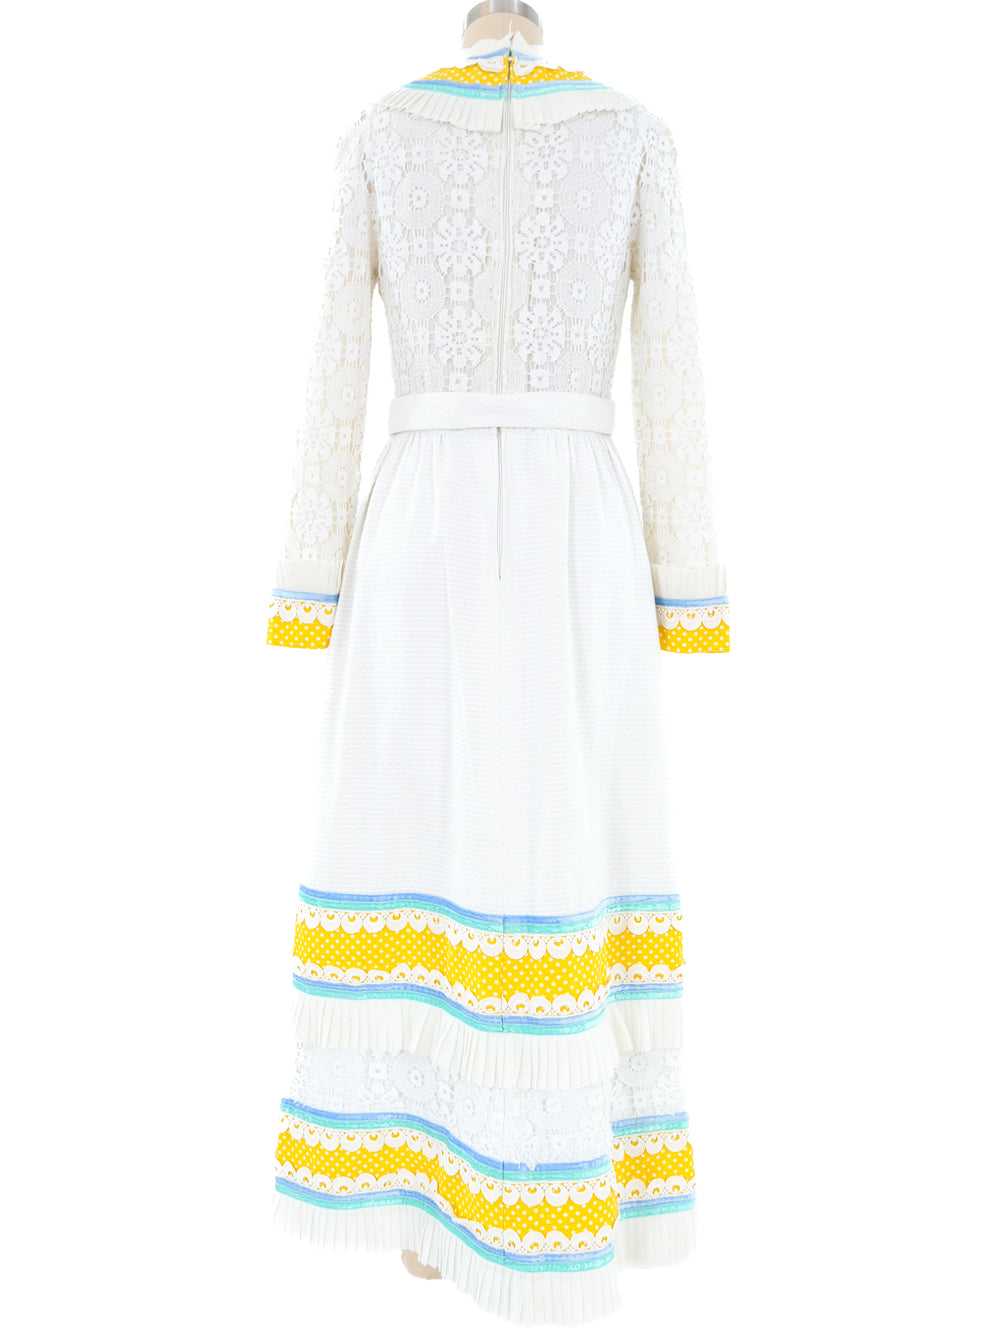 1970's Malcolm Starr Tiered Lace Dress - image 4